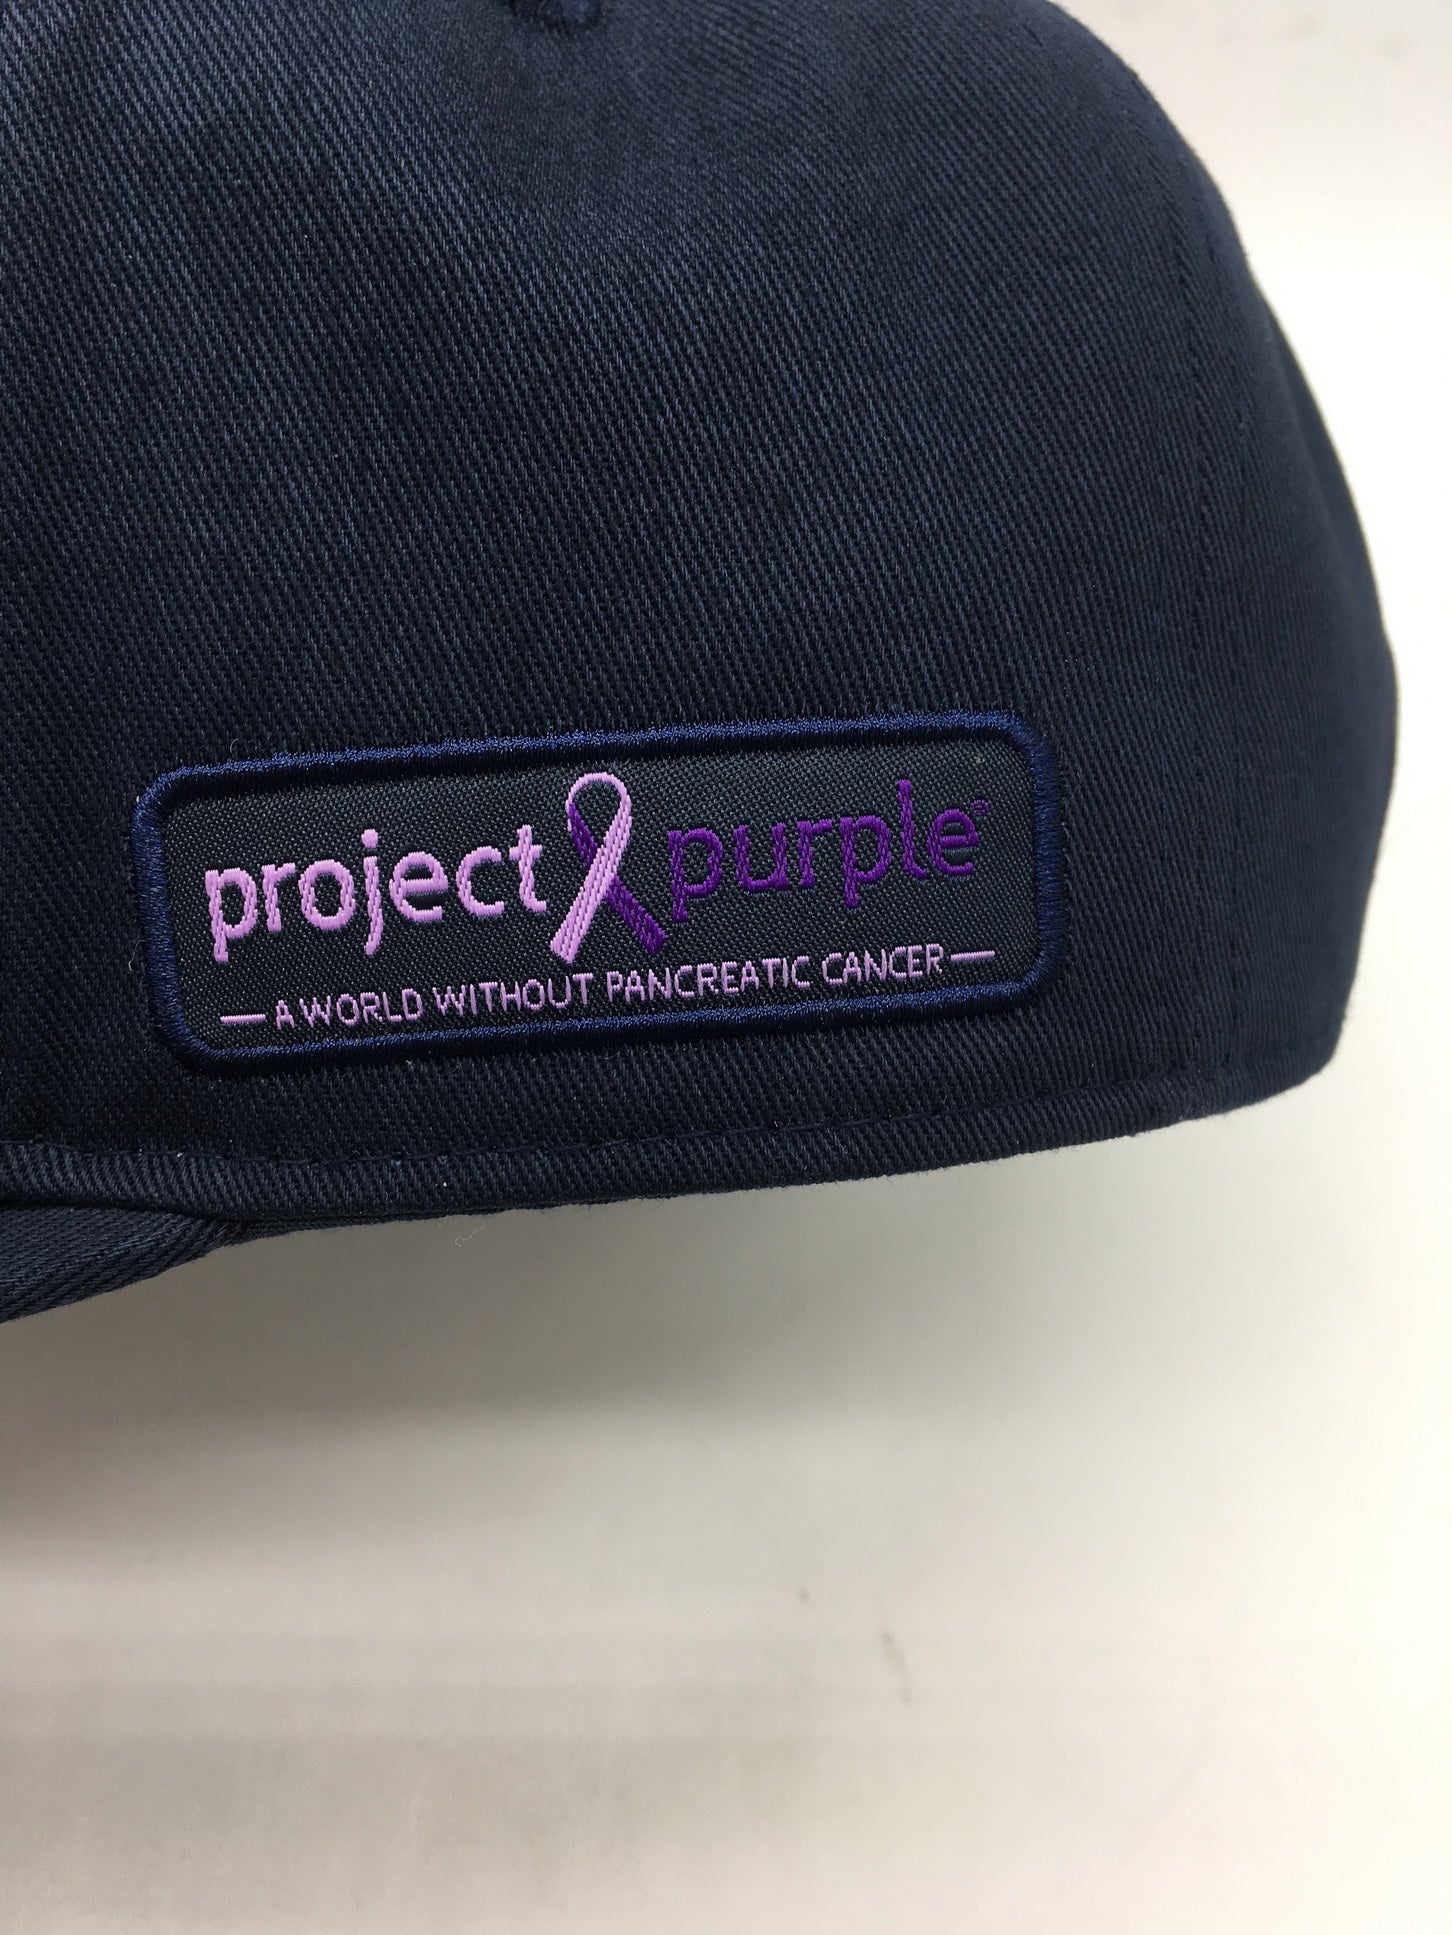 Close up view of Project Purple Logo on Yankee hat